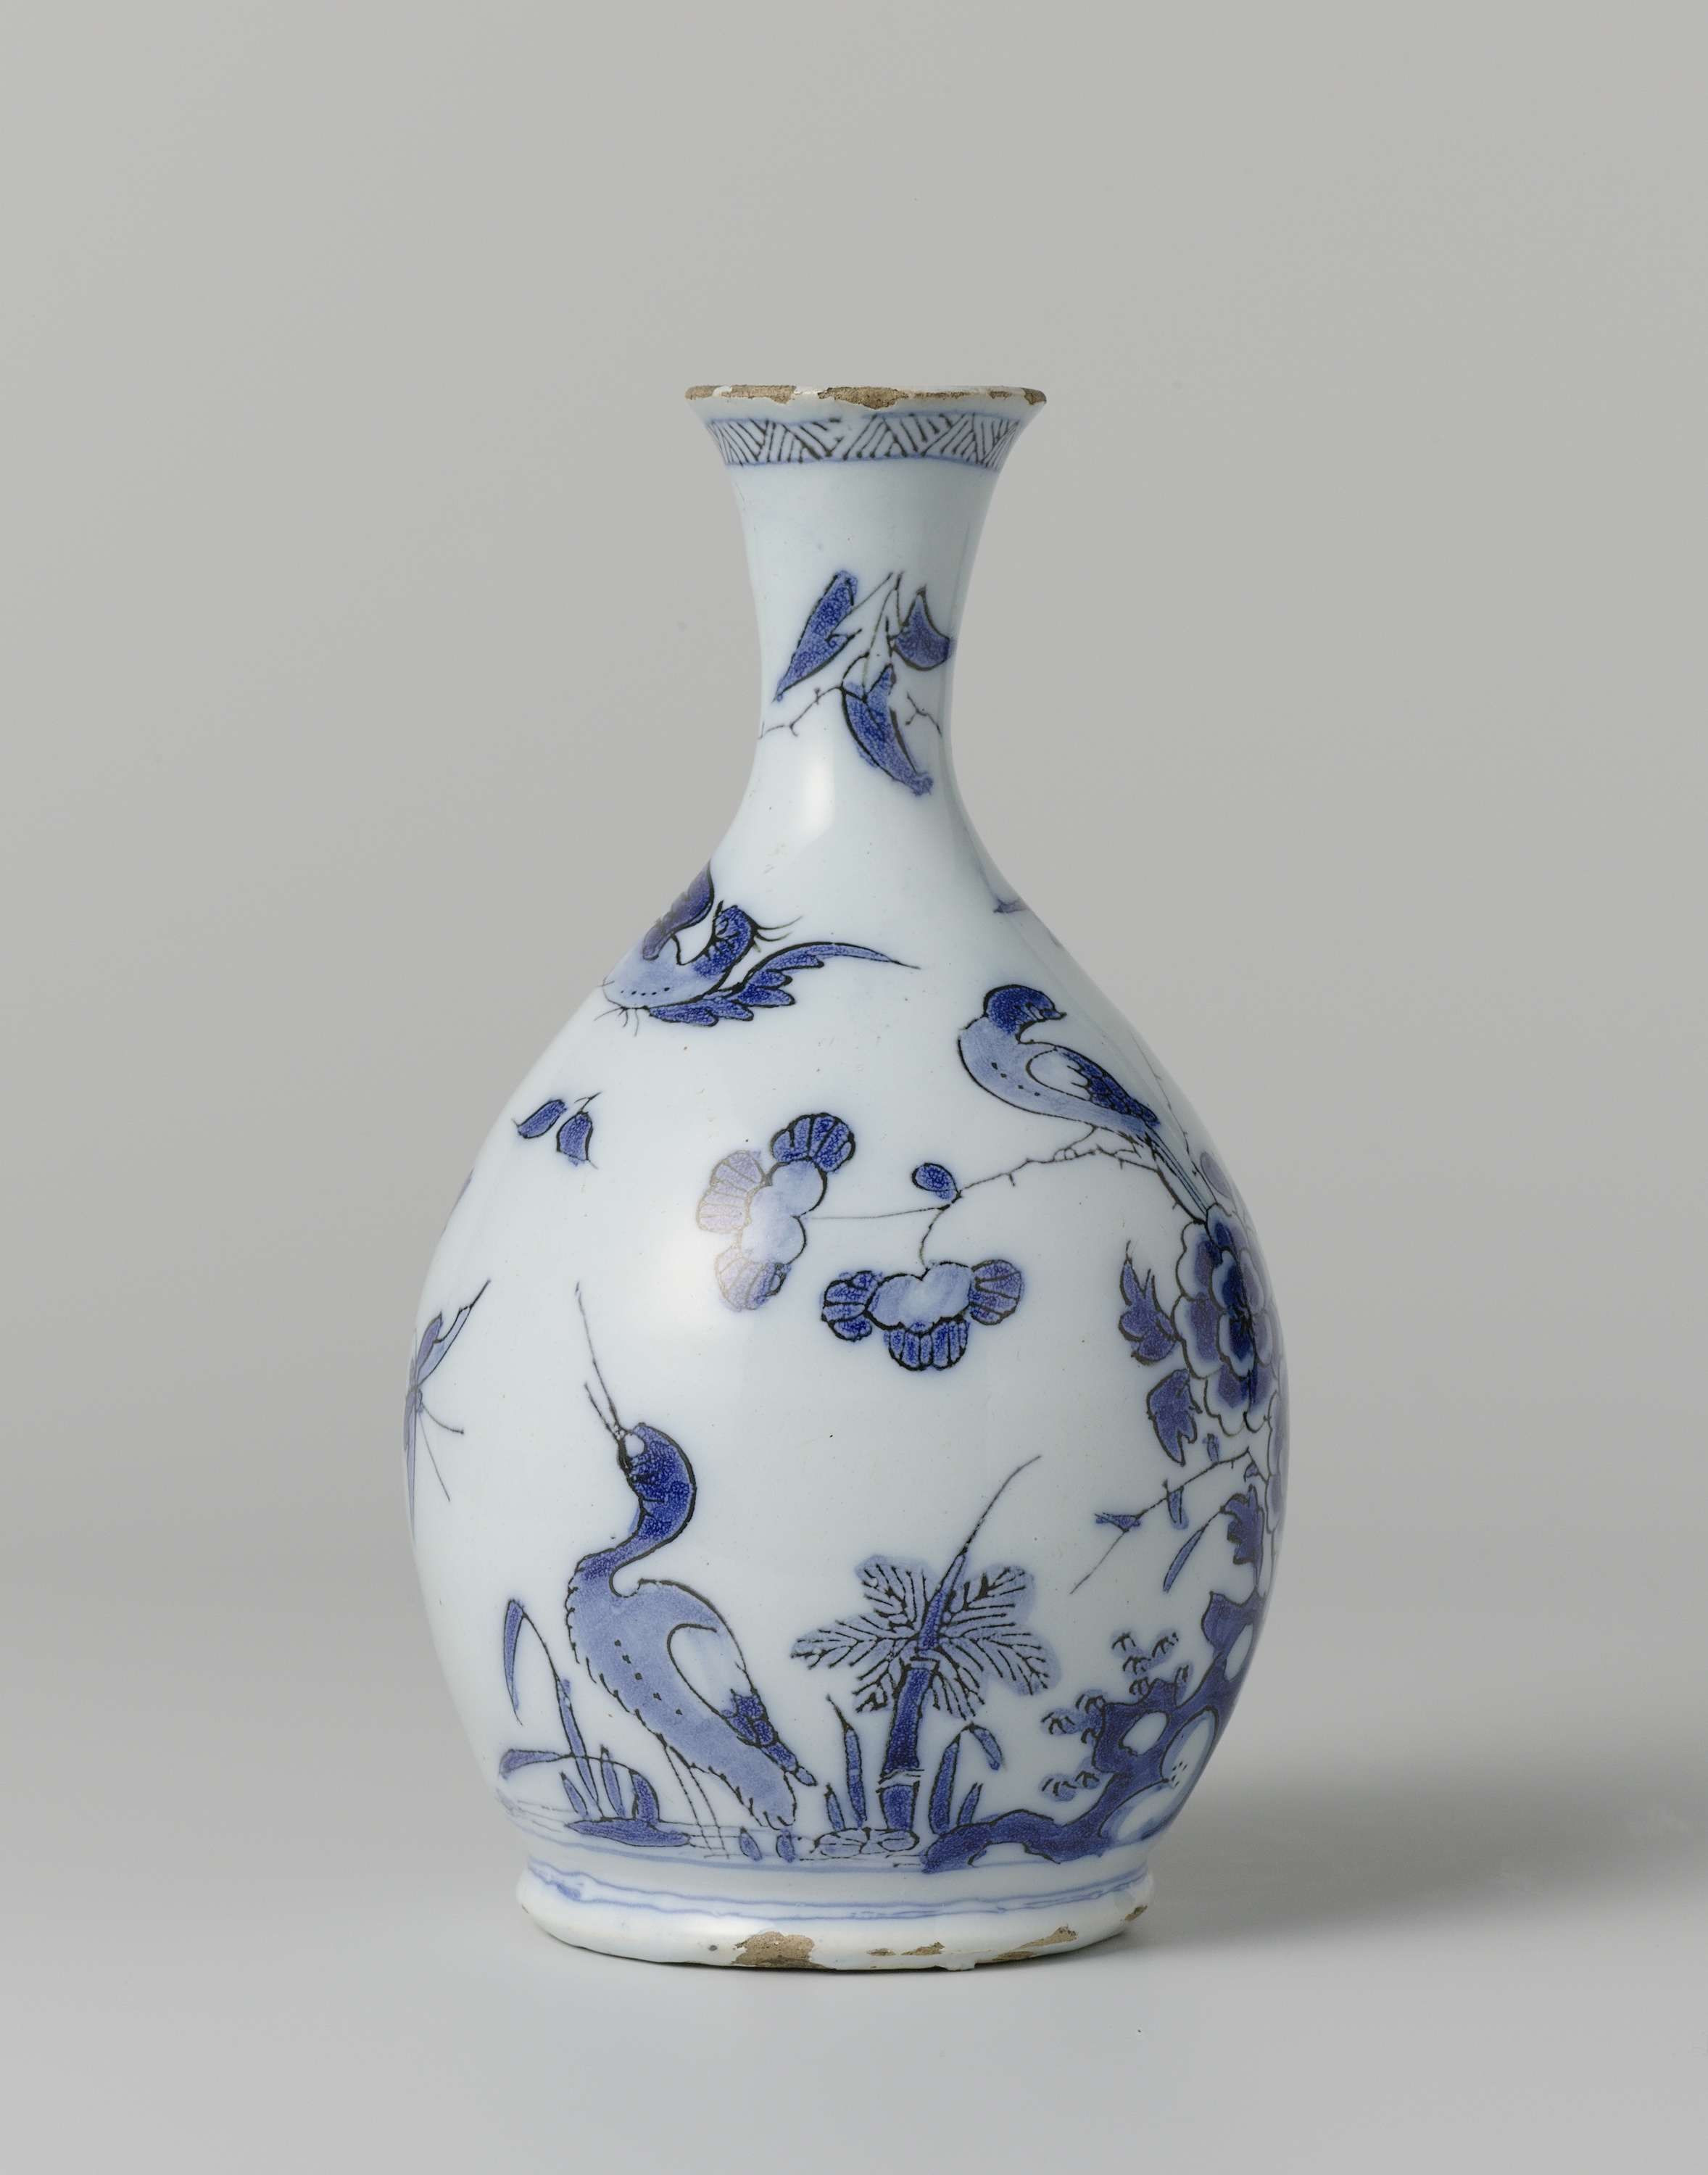 26 attractive Delft Blue Holland Vase 2024 free download delft blue holland vase of het moriaanshooft vase het moriaanshooft rochus jacobsz with regard to hoppesteijn place delft dating c 1685 c 1690 faience vase with the chinese porcelain inspire